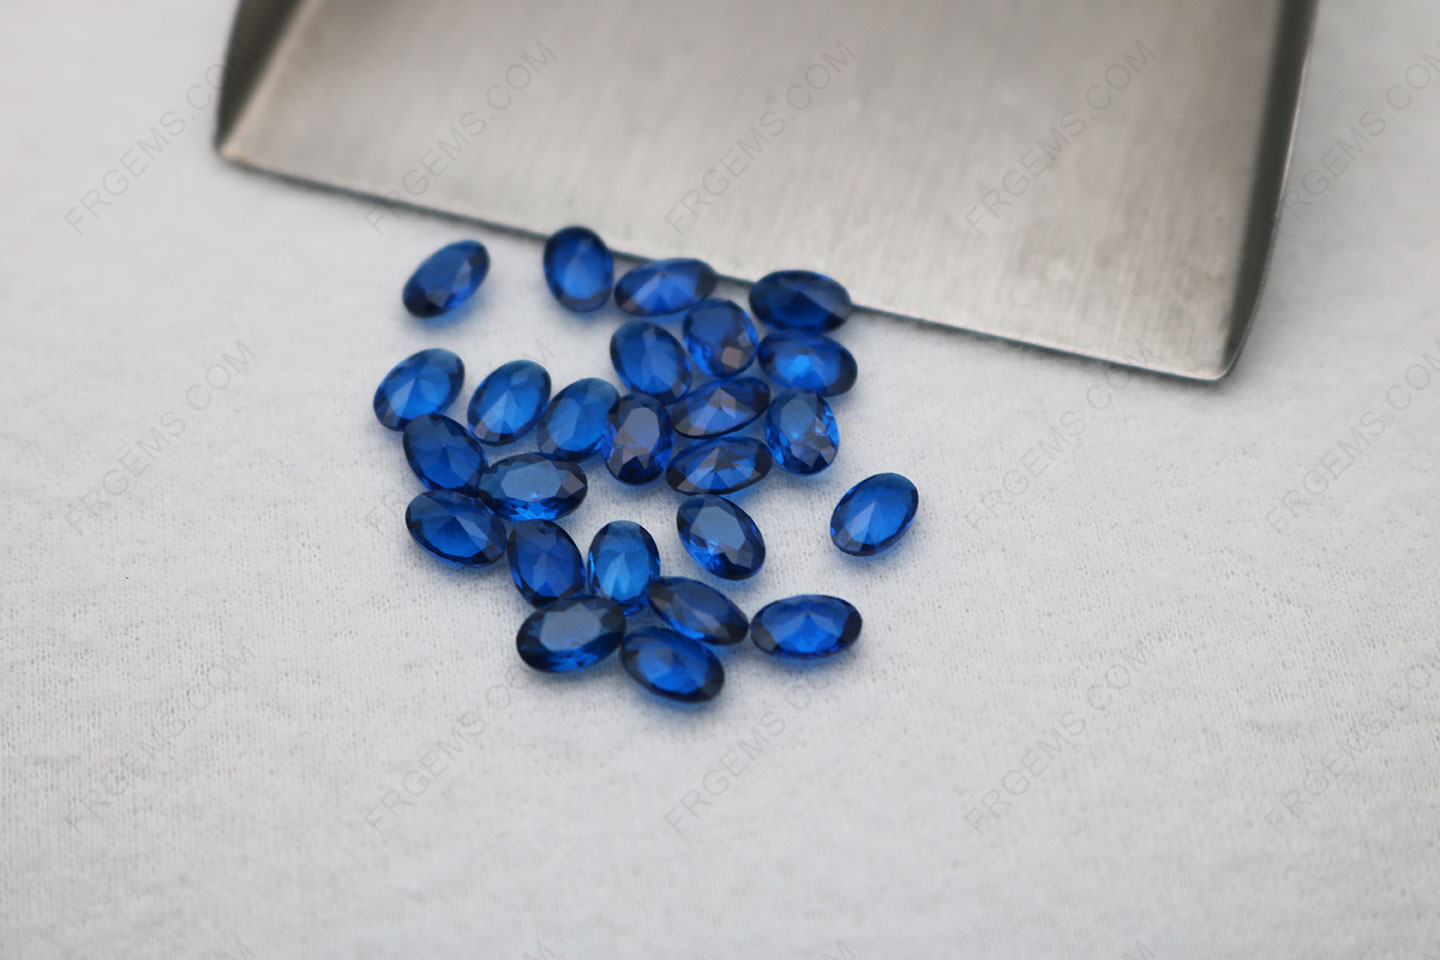 Synthetic Spinel Blue Sapphire #113 Color Oval shape faceted cut 6x4mm Loose gemstones